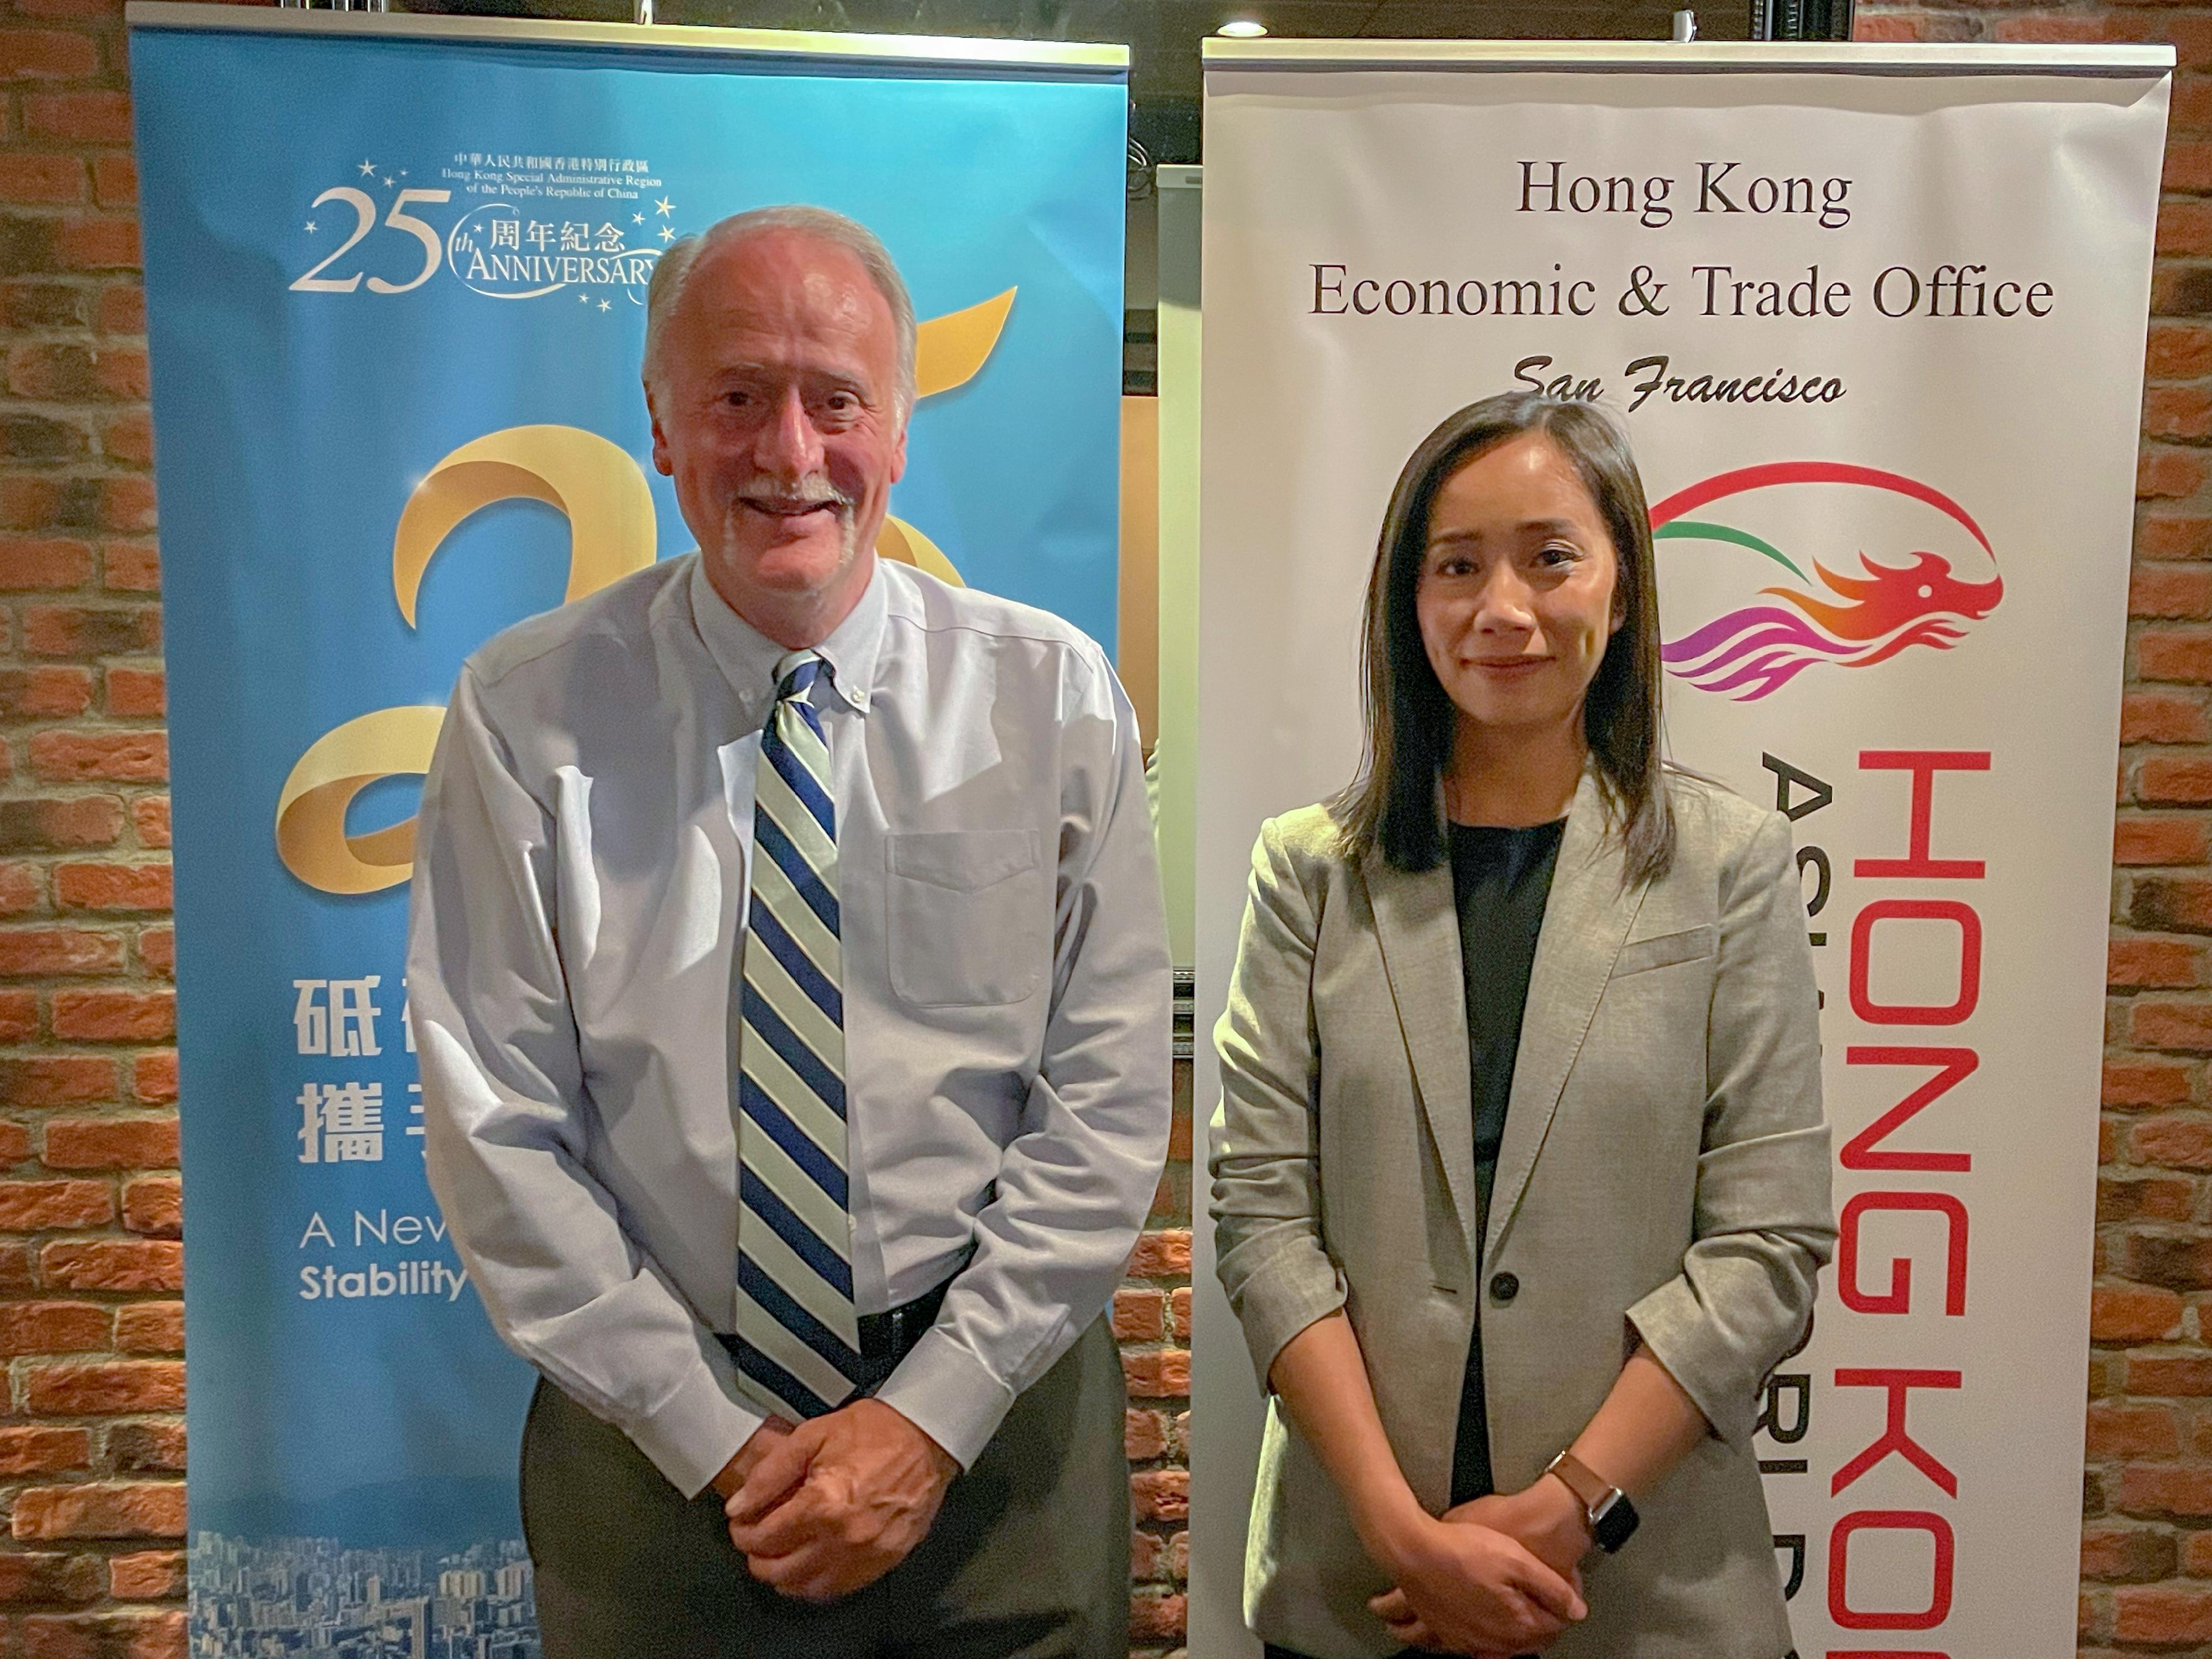 The Hong Kong Economic and Trade Office, San Francisco (HKETO San Francisco) co-hosted a reception in Anchorage, Alaska with the World Trade Center Anchorage, to celebrate the 25th anniversary of the establishment of the Hong Kong Special Administrative Region on June 15 (Anchorage time). Photo shows the Director of HKETO San Francisco, Ms Jacko Tsang (right) and Mr Greg Wolf, Executive Director, World Trade Center Anchorage (left).